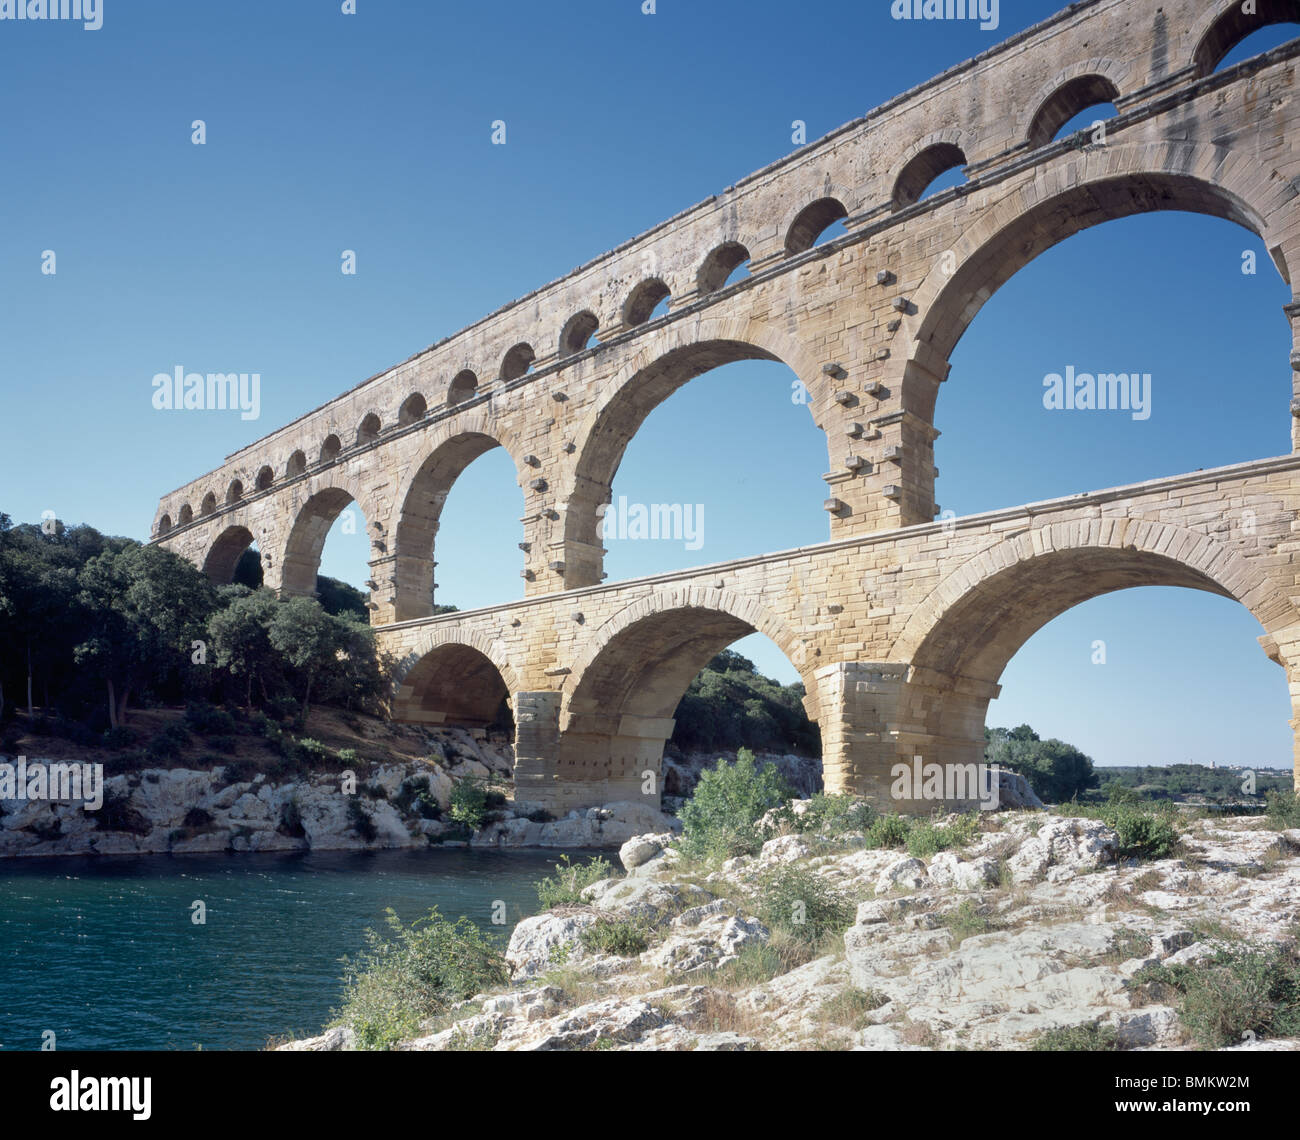 Pont du Gard France. 1st century Roman aqueduct, with three rows of arches. Stock Photo